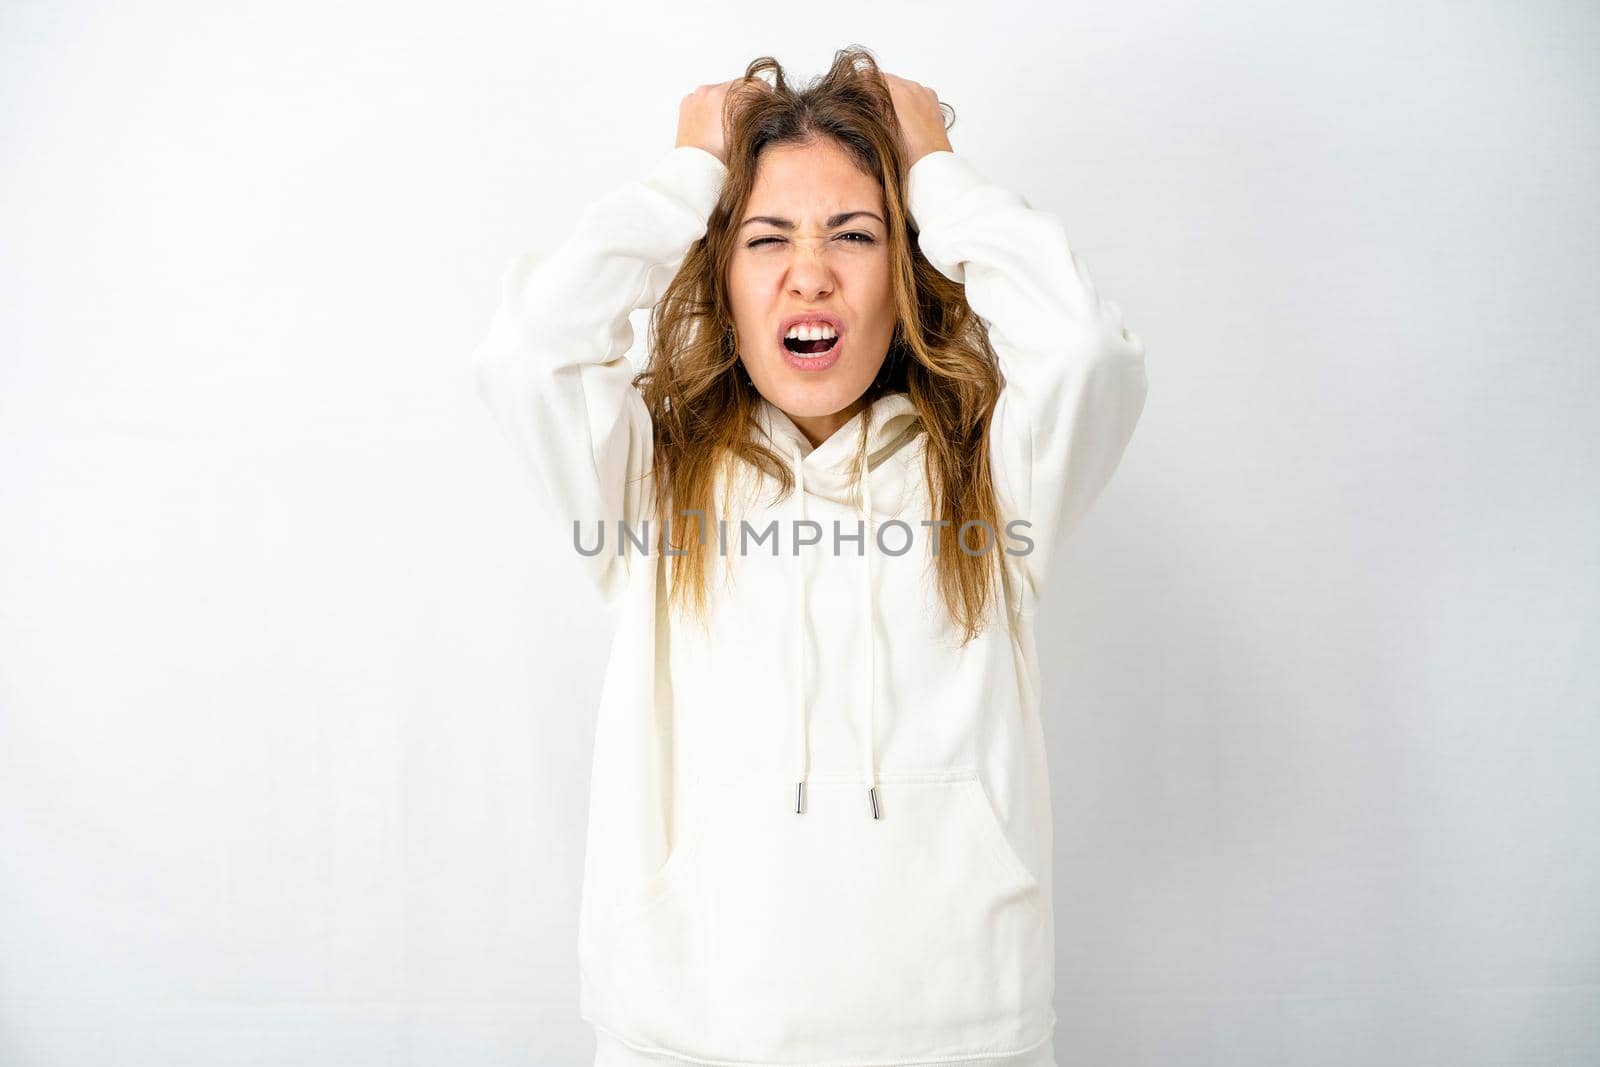 Young model isolated on white background tears hair out with despair face expressing anger by screaming with her mouth open and closed eyes. Concept of modern times stressed and frustrated woman